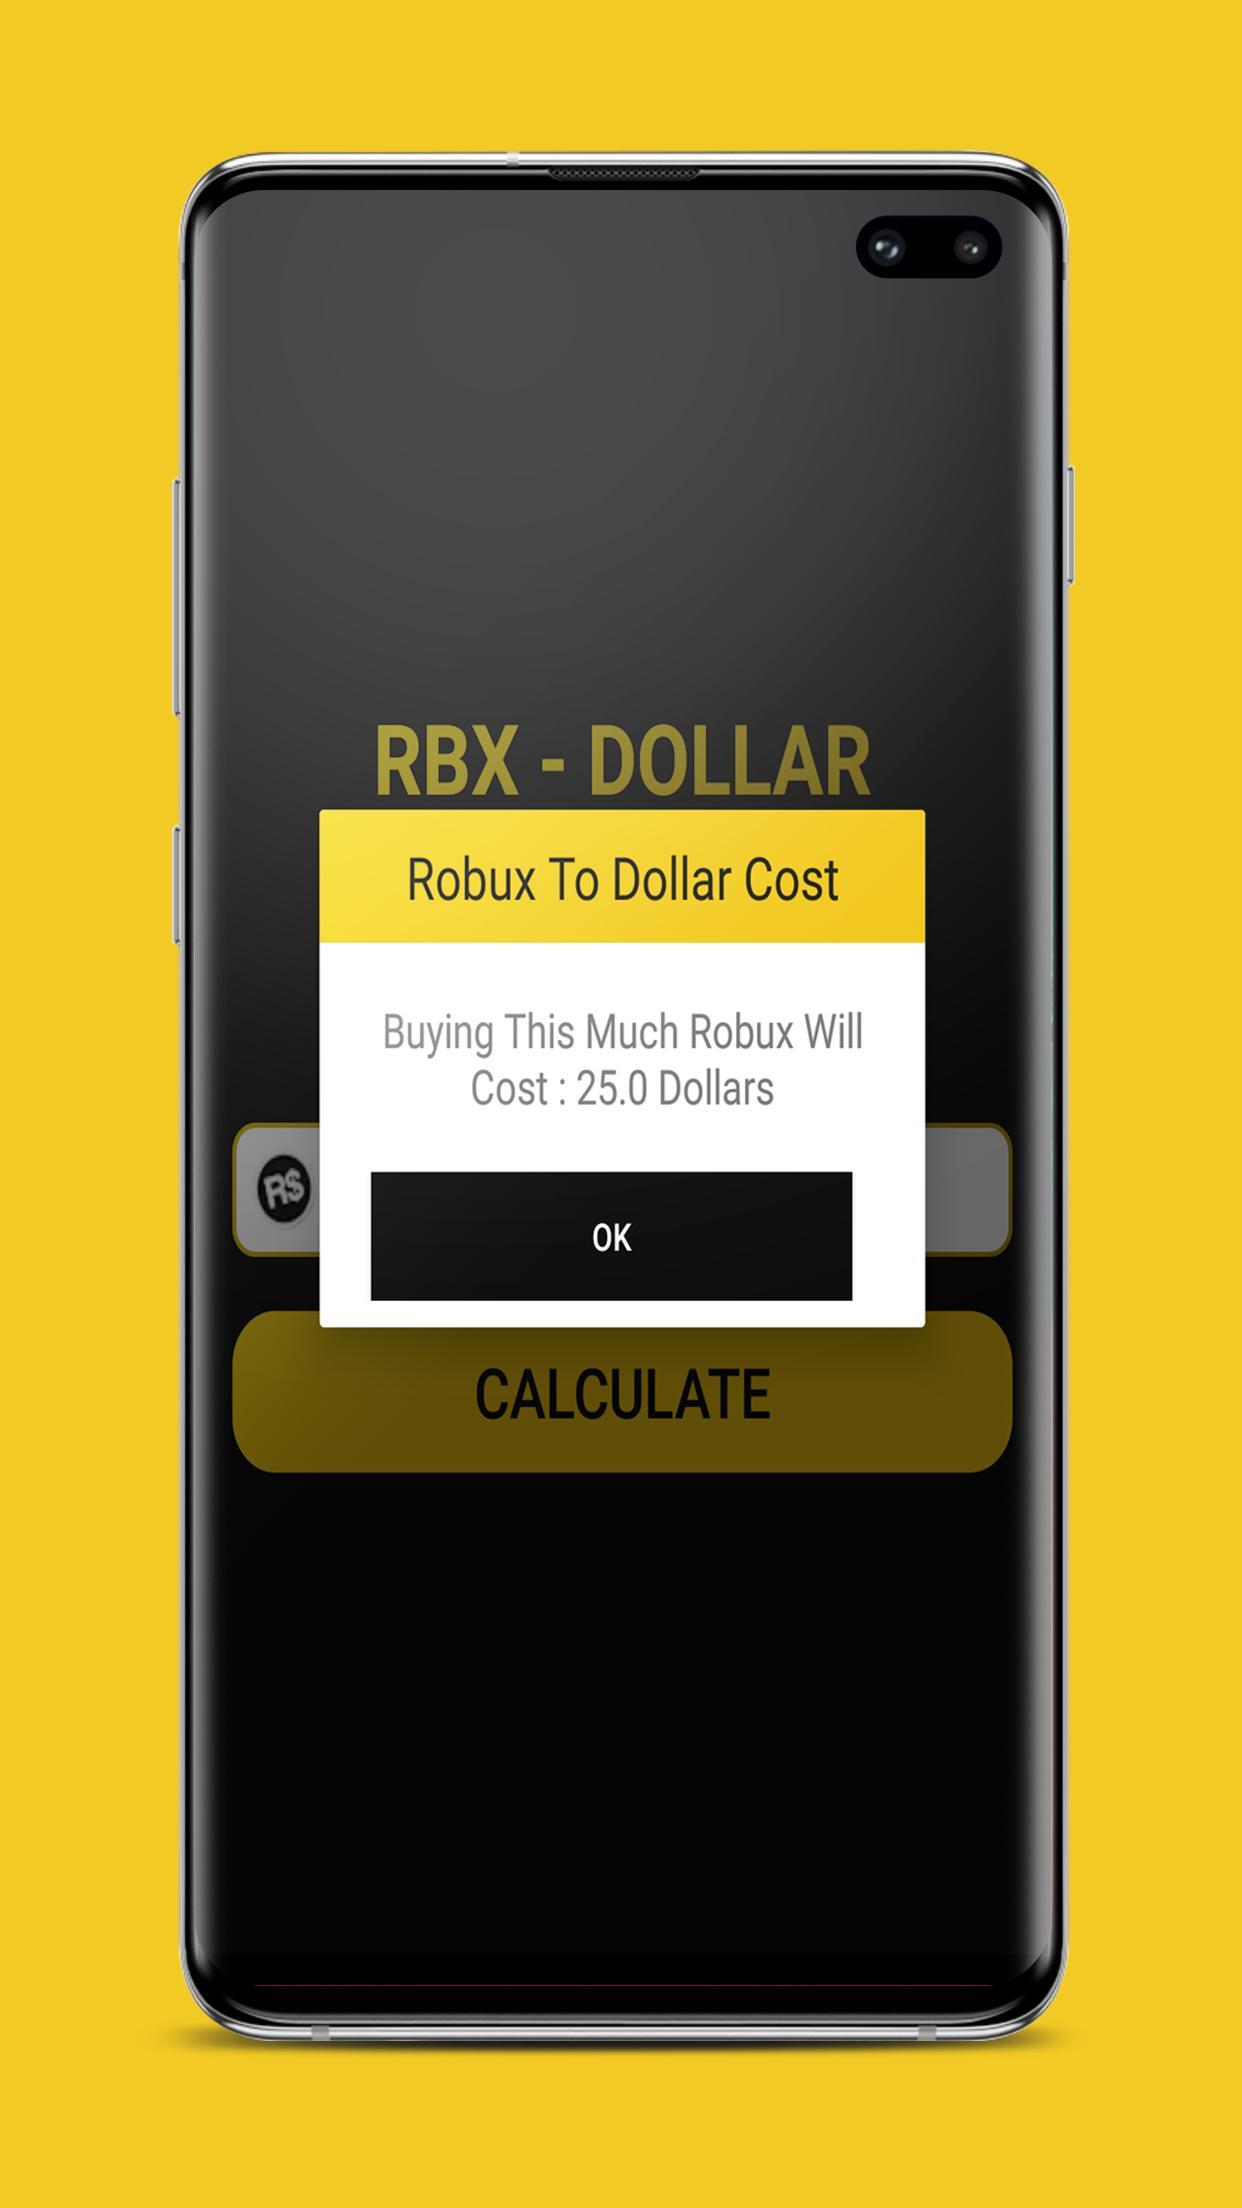 Buying Robux From Rbx Place Roblox Unblocked Roblox Free Robux Codes 2019 August Calendar - rbx place free robux